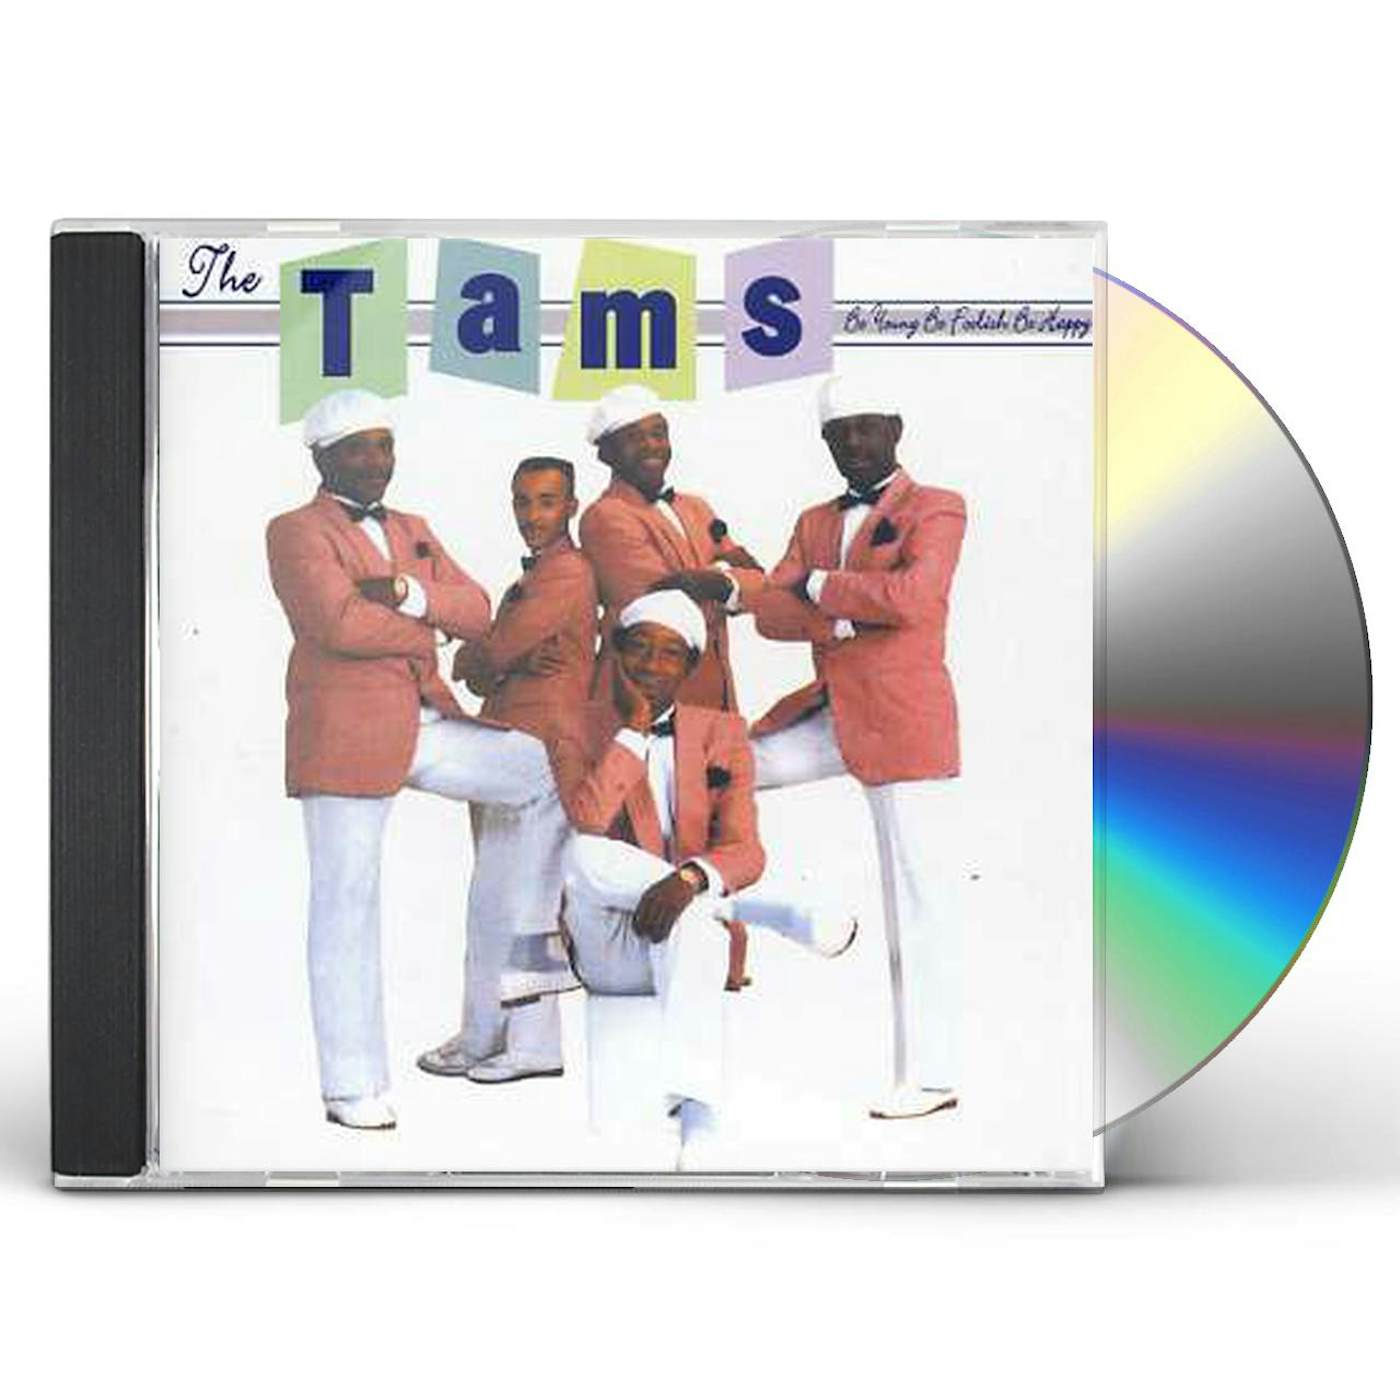 The Tams BE YOUNG BE FOOLISH BE HAPPY CD